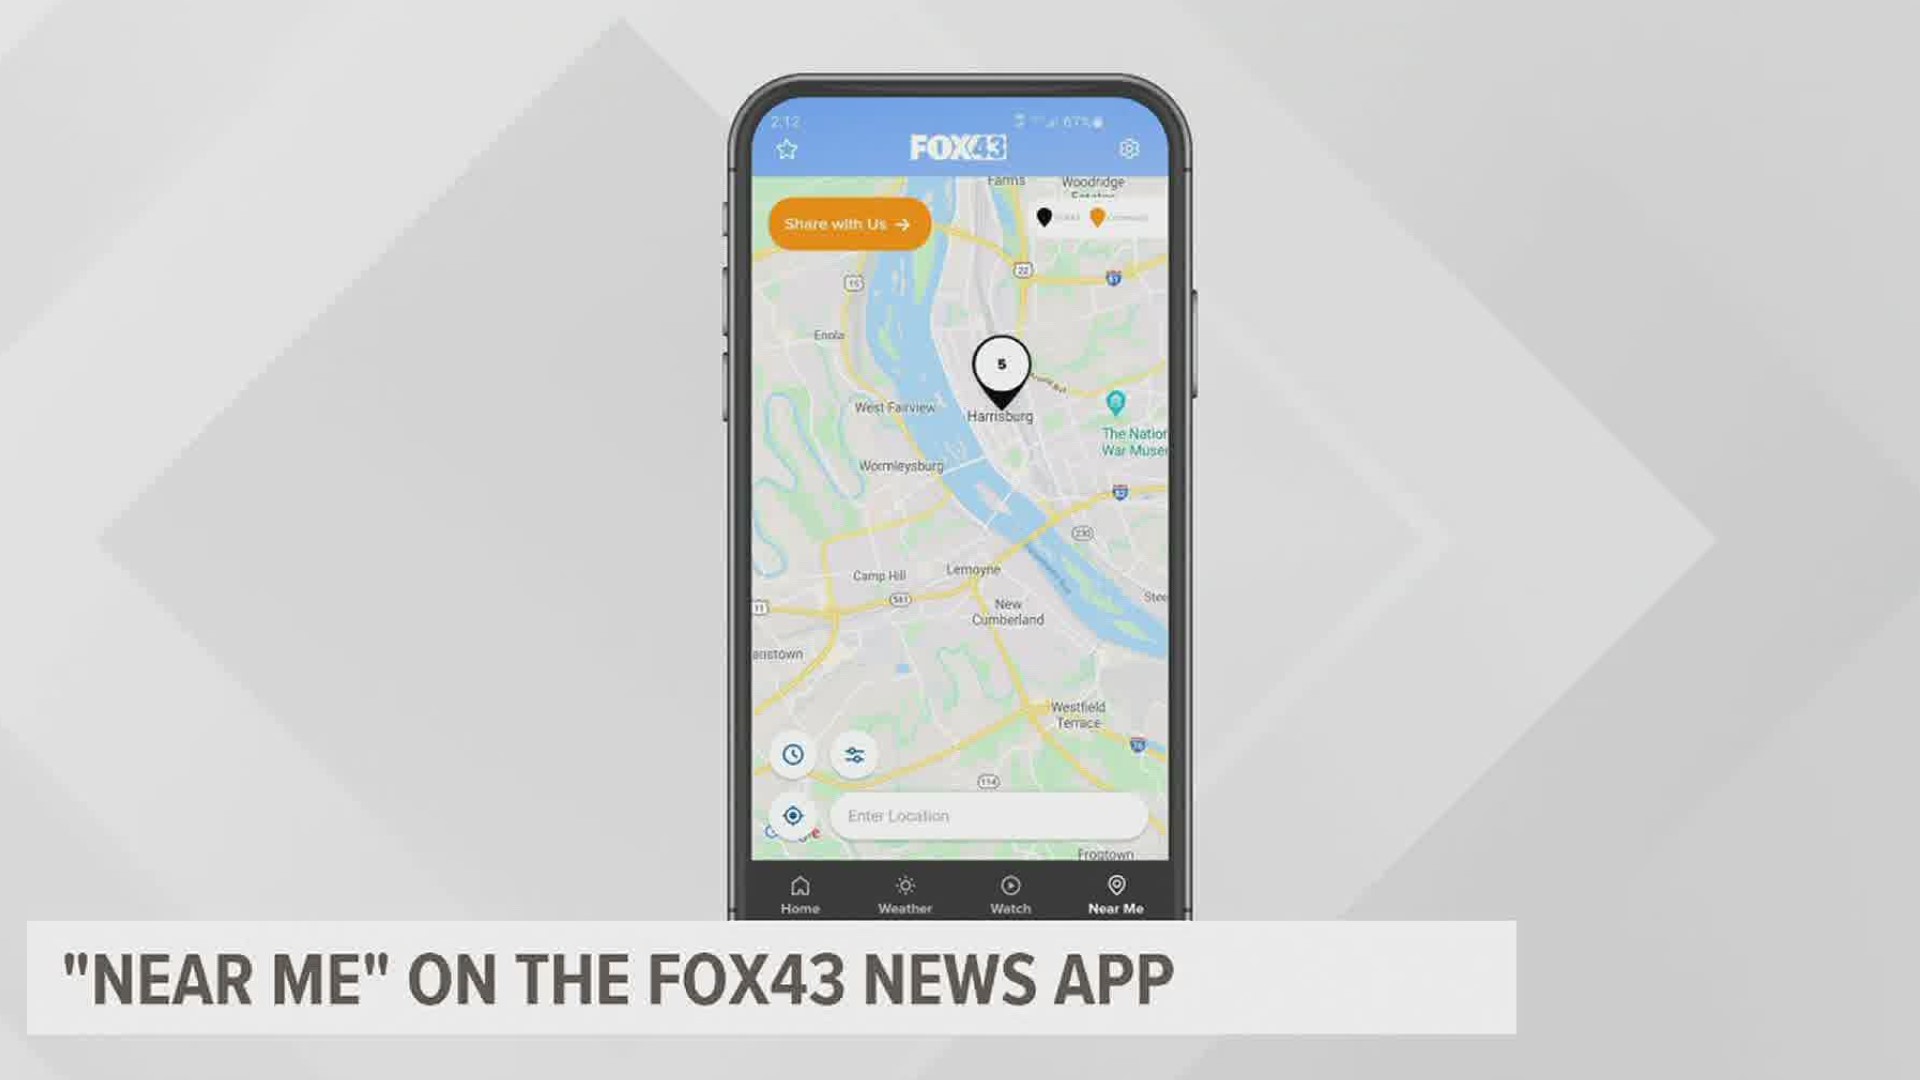 You can now share photos and videos of news spotted in your neighborhood right in the FOX43 app, through a new feature called "Near Me."